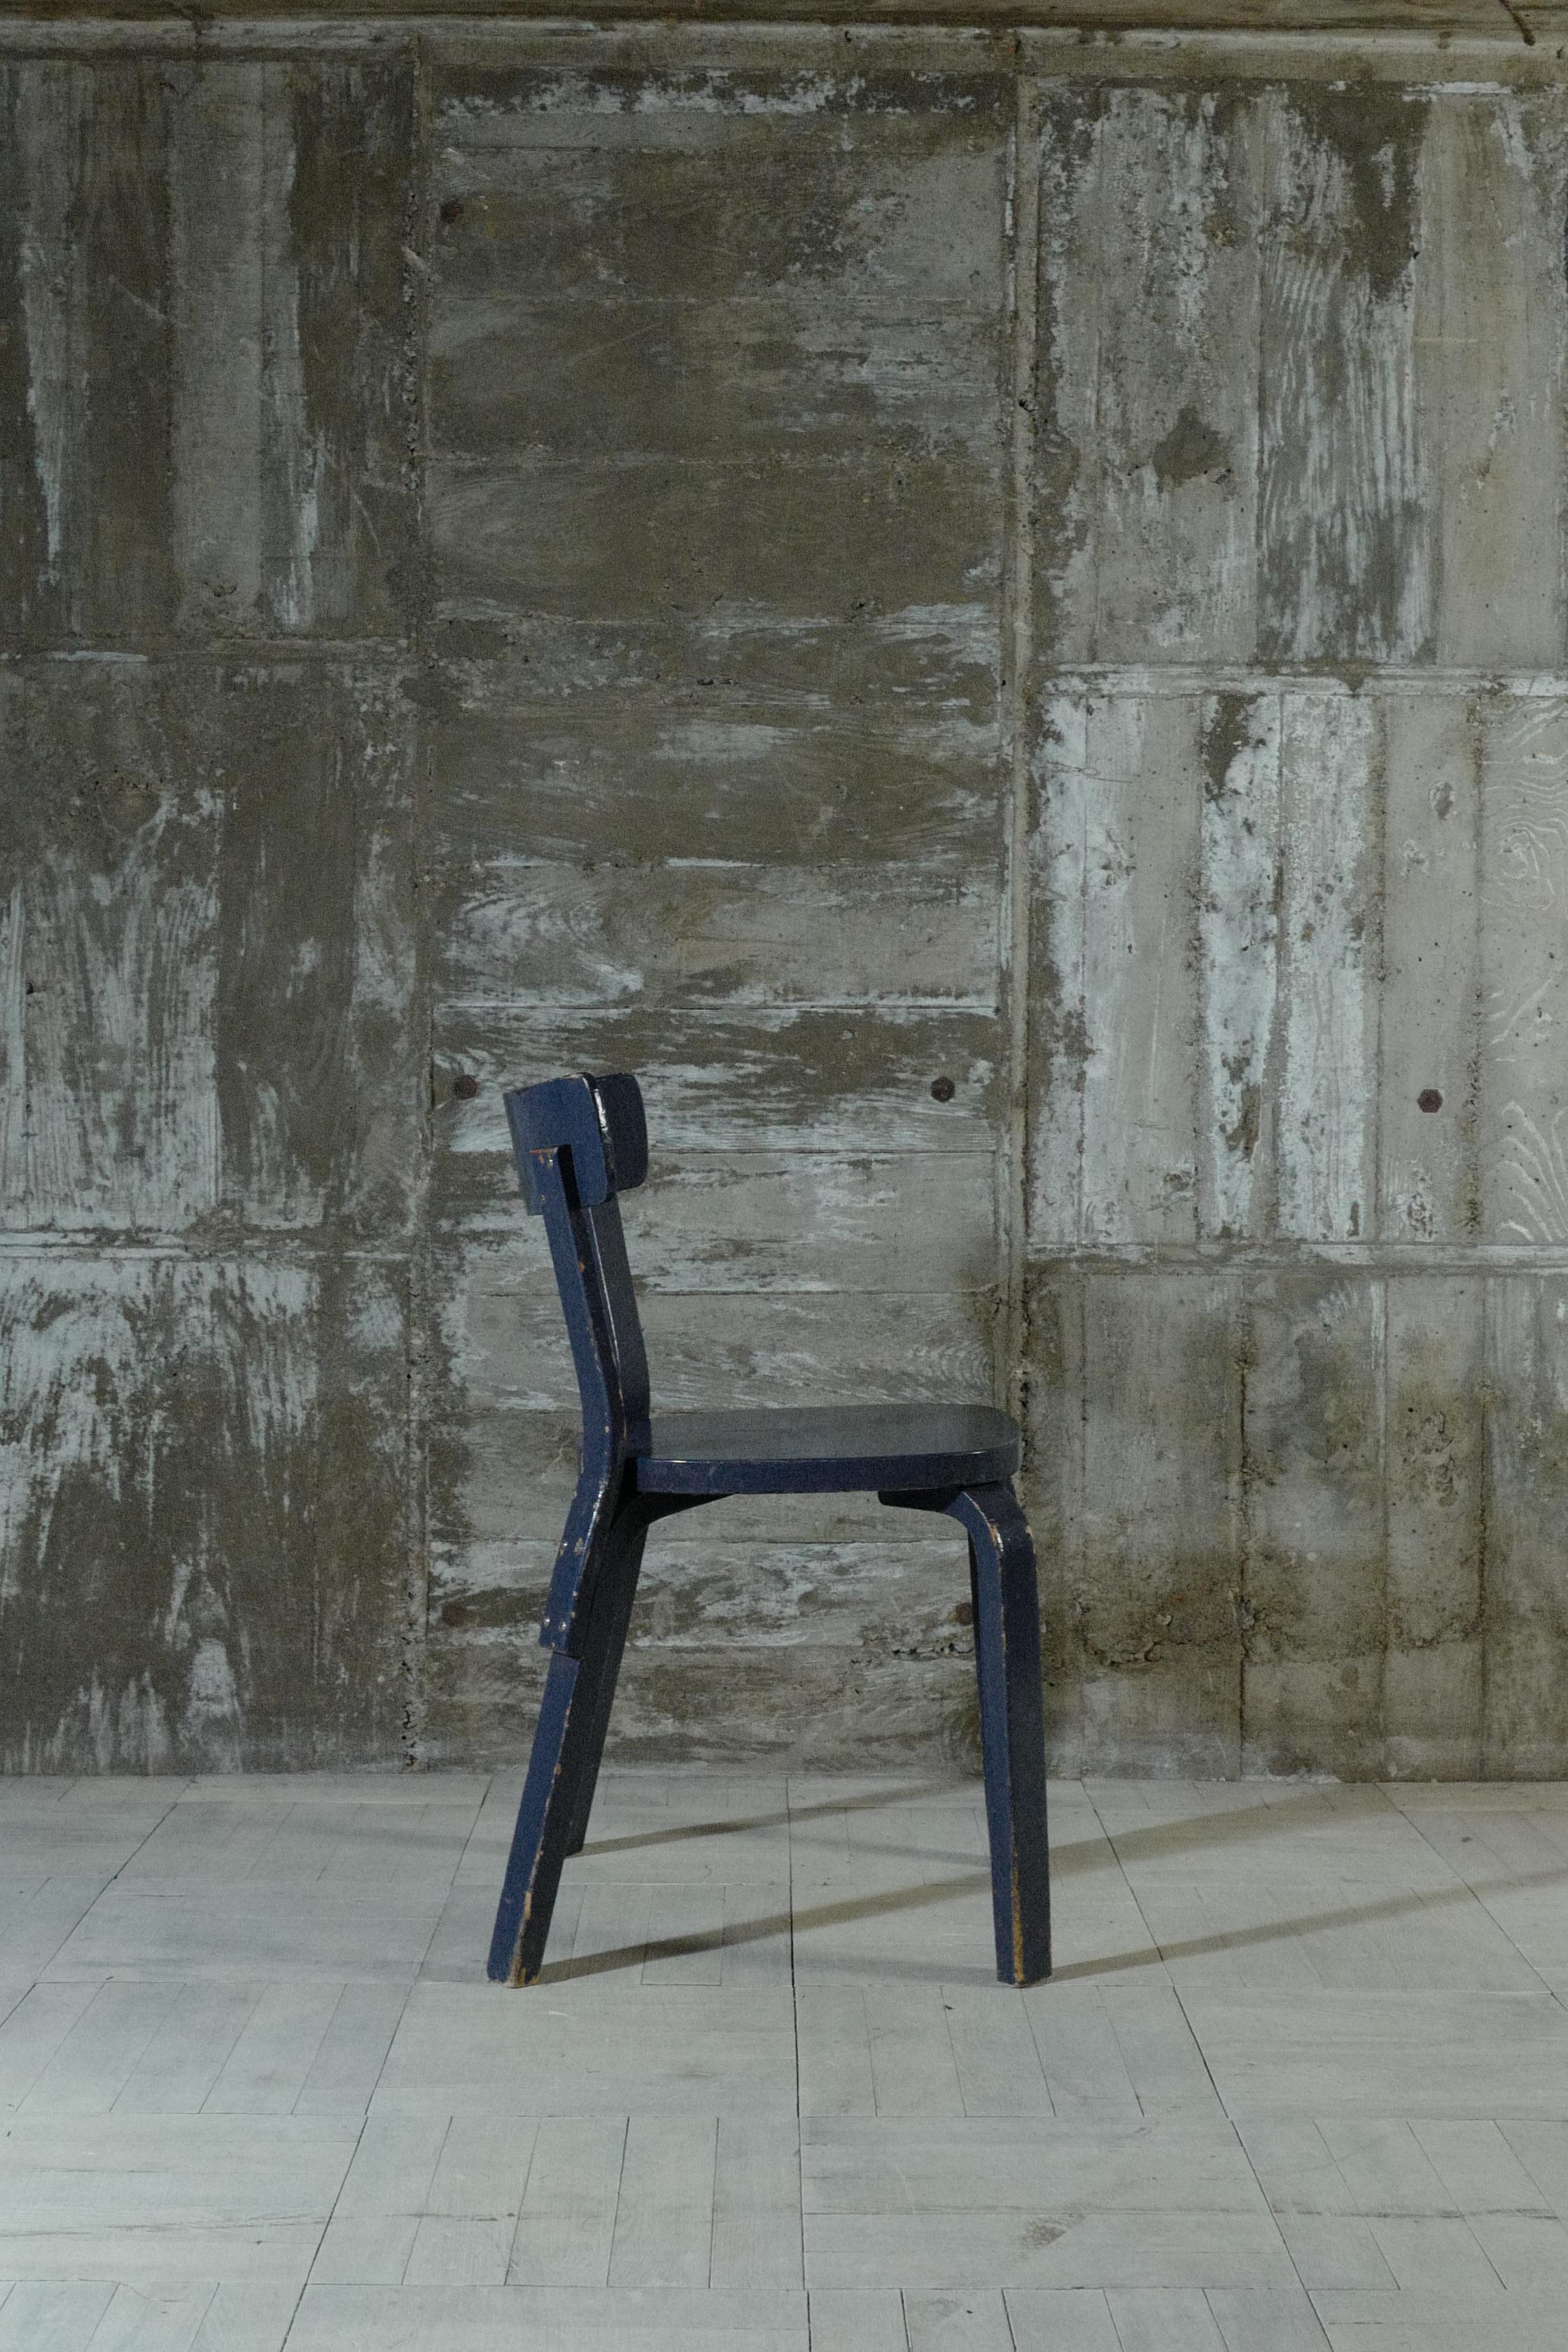 Designed by Alvar Aalto.
This is chair 69 .
Deep blue paint is applied all over.
This chair was manufactured in the 1930s.
